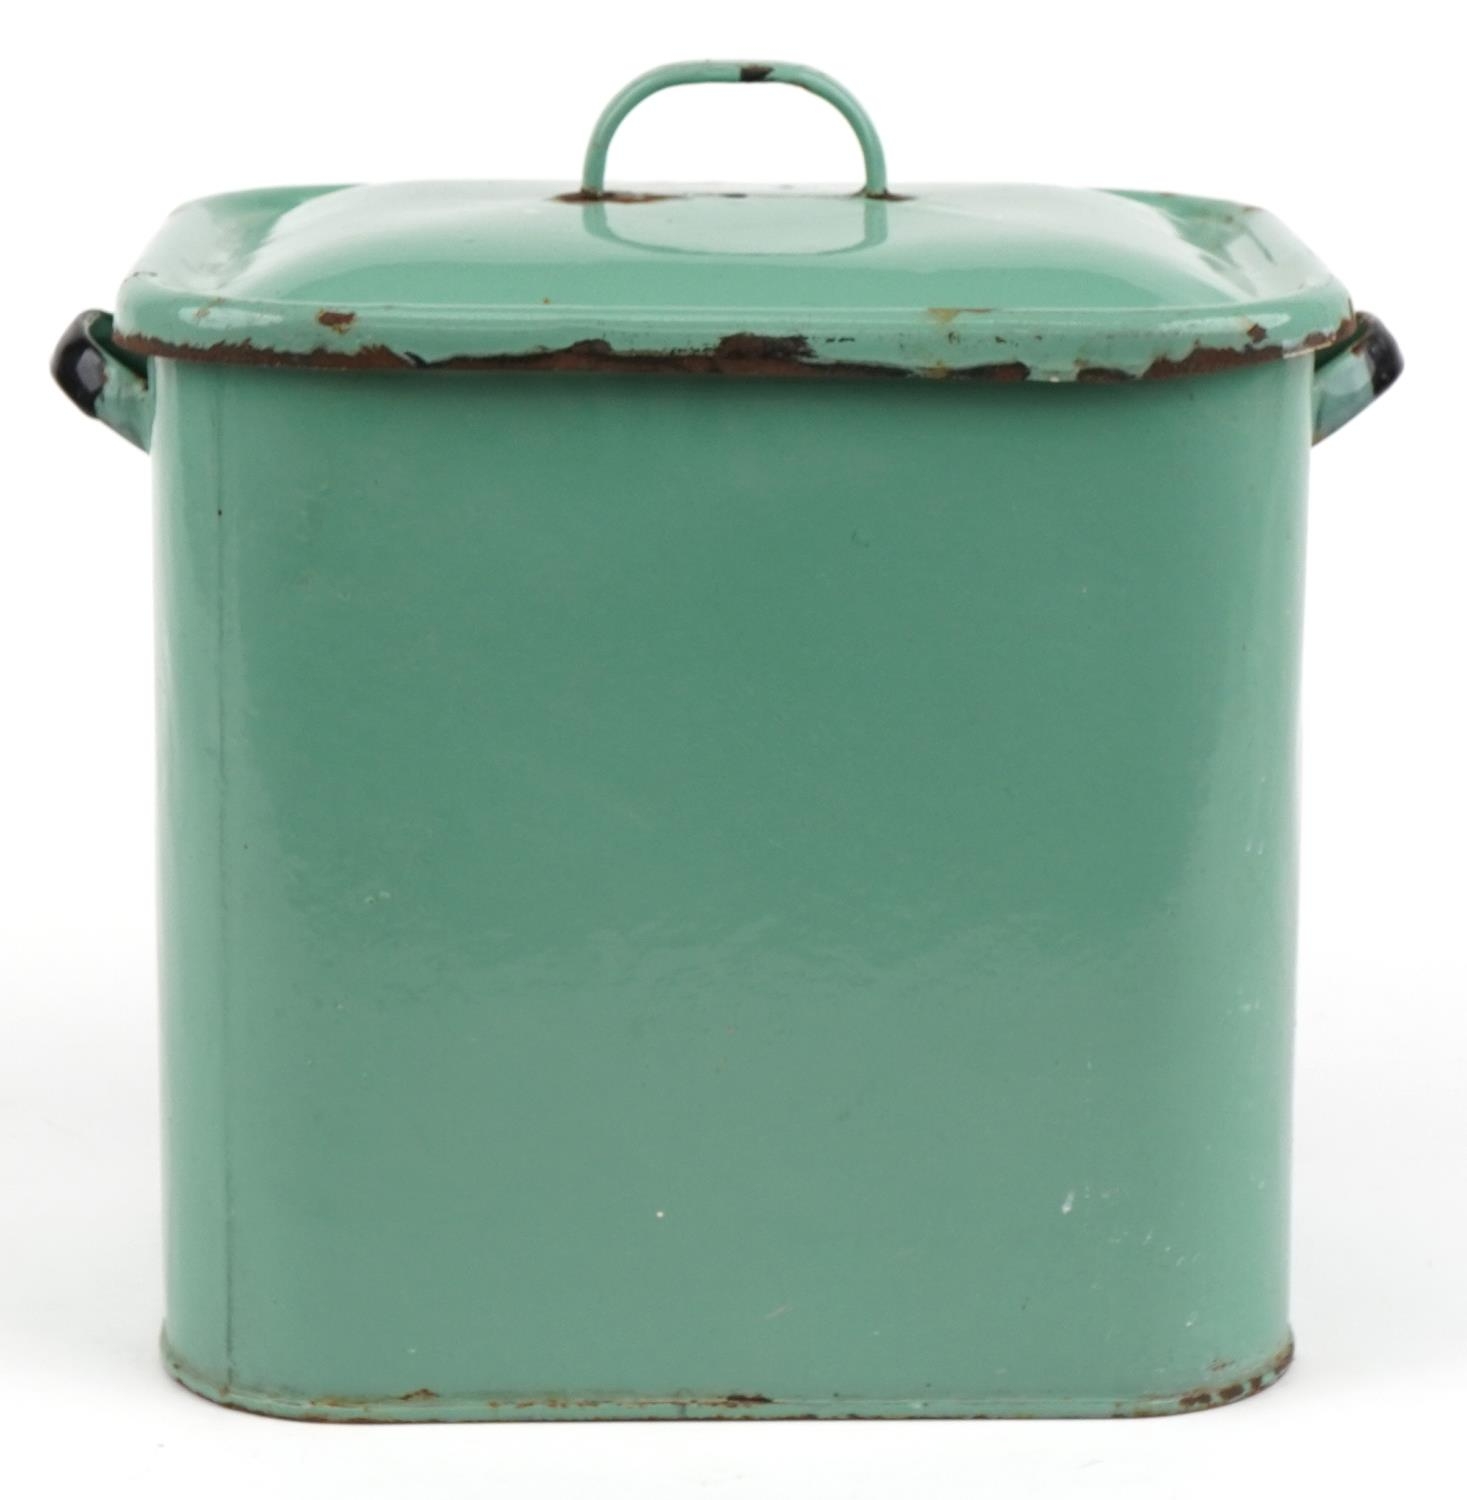 Vintage green enamelled metal bread bin and cover, 33cm H x 34cm W x 25cm D : For further - Image 2 of 3